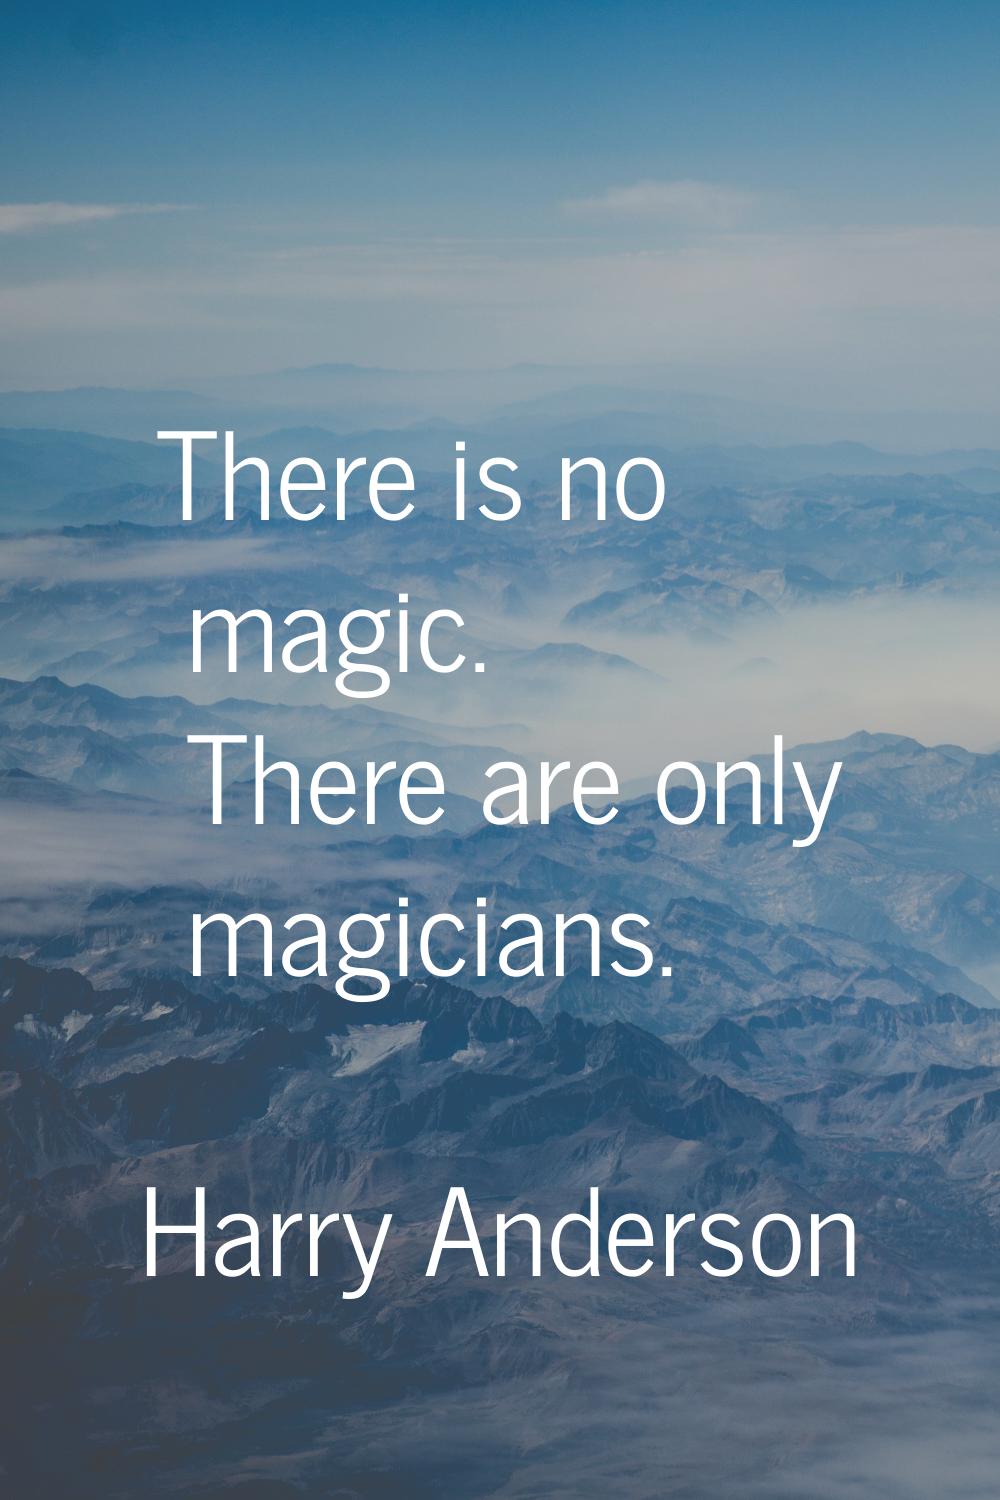 There is no magic. There are only magicians.